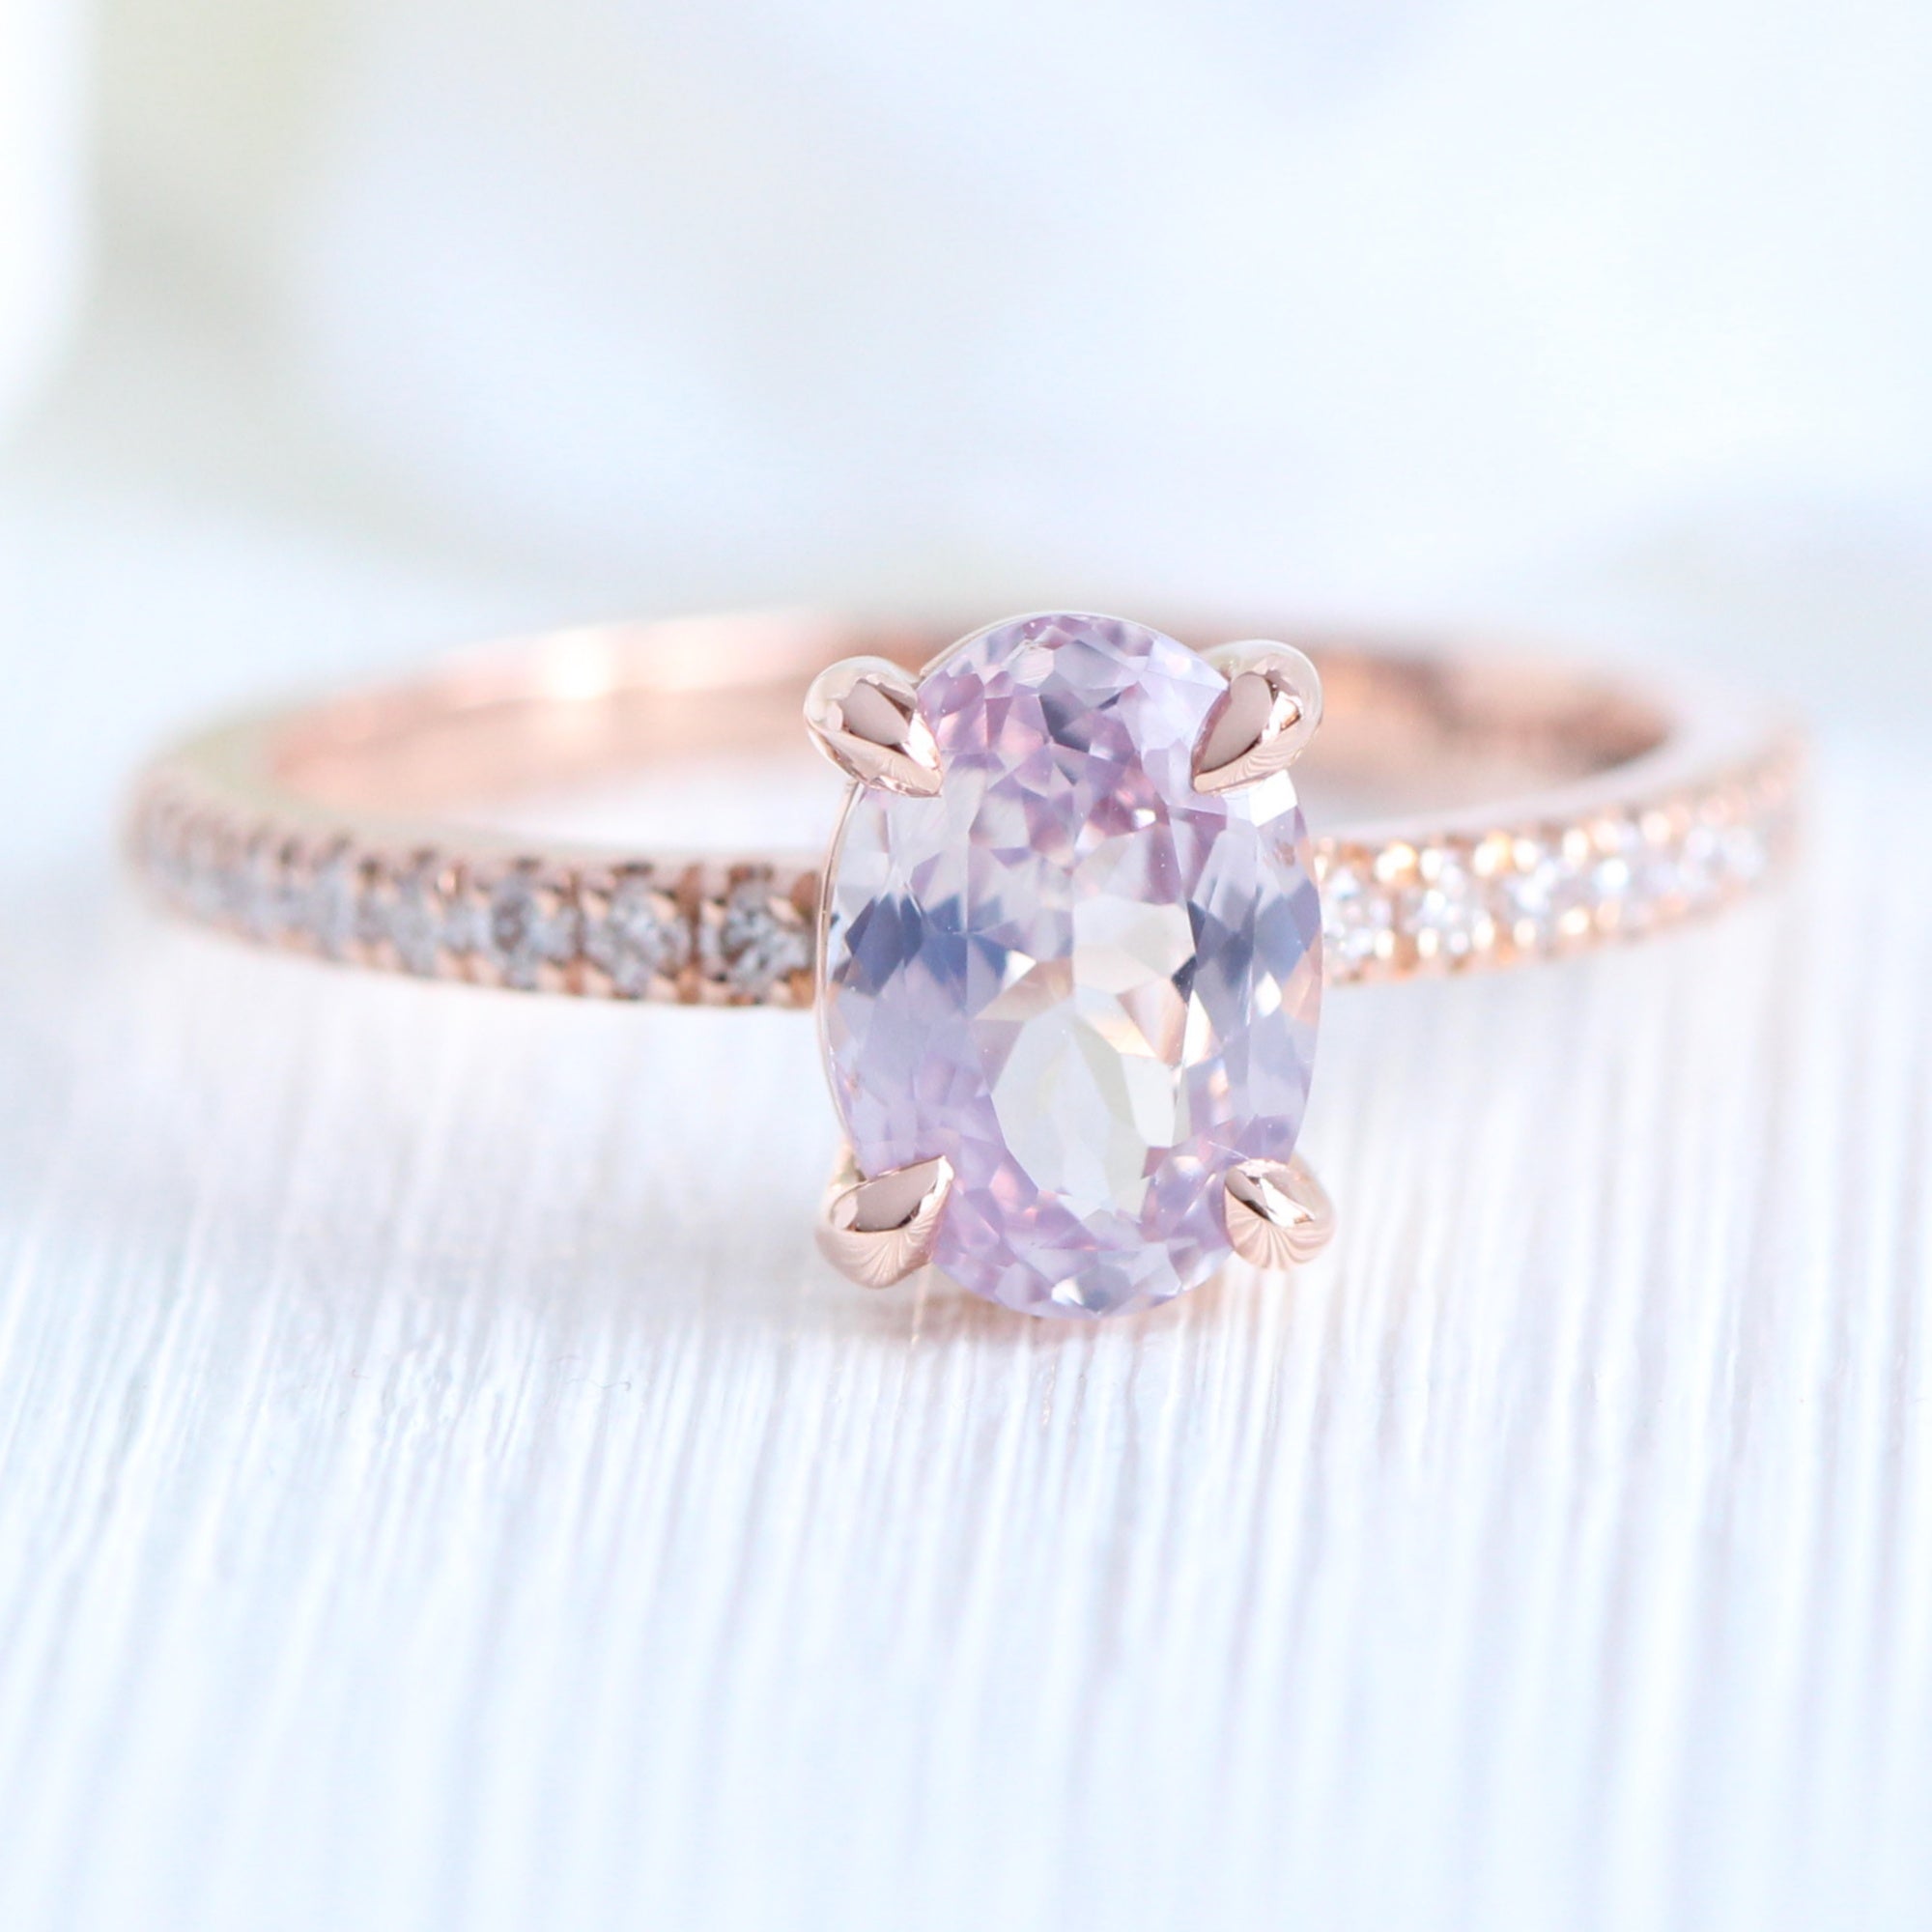 Dreamy lavender sapphire ring rose gold pave diamond band low set engagement ring la more design jewelry